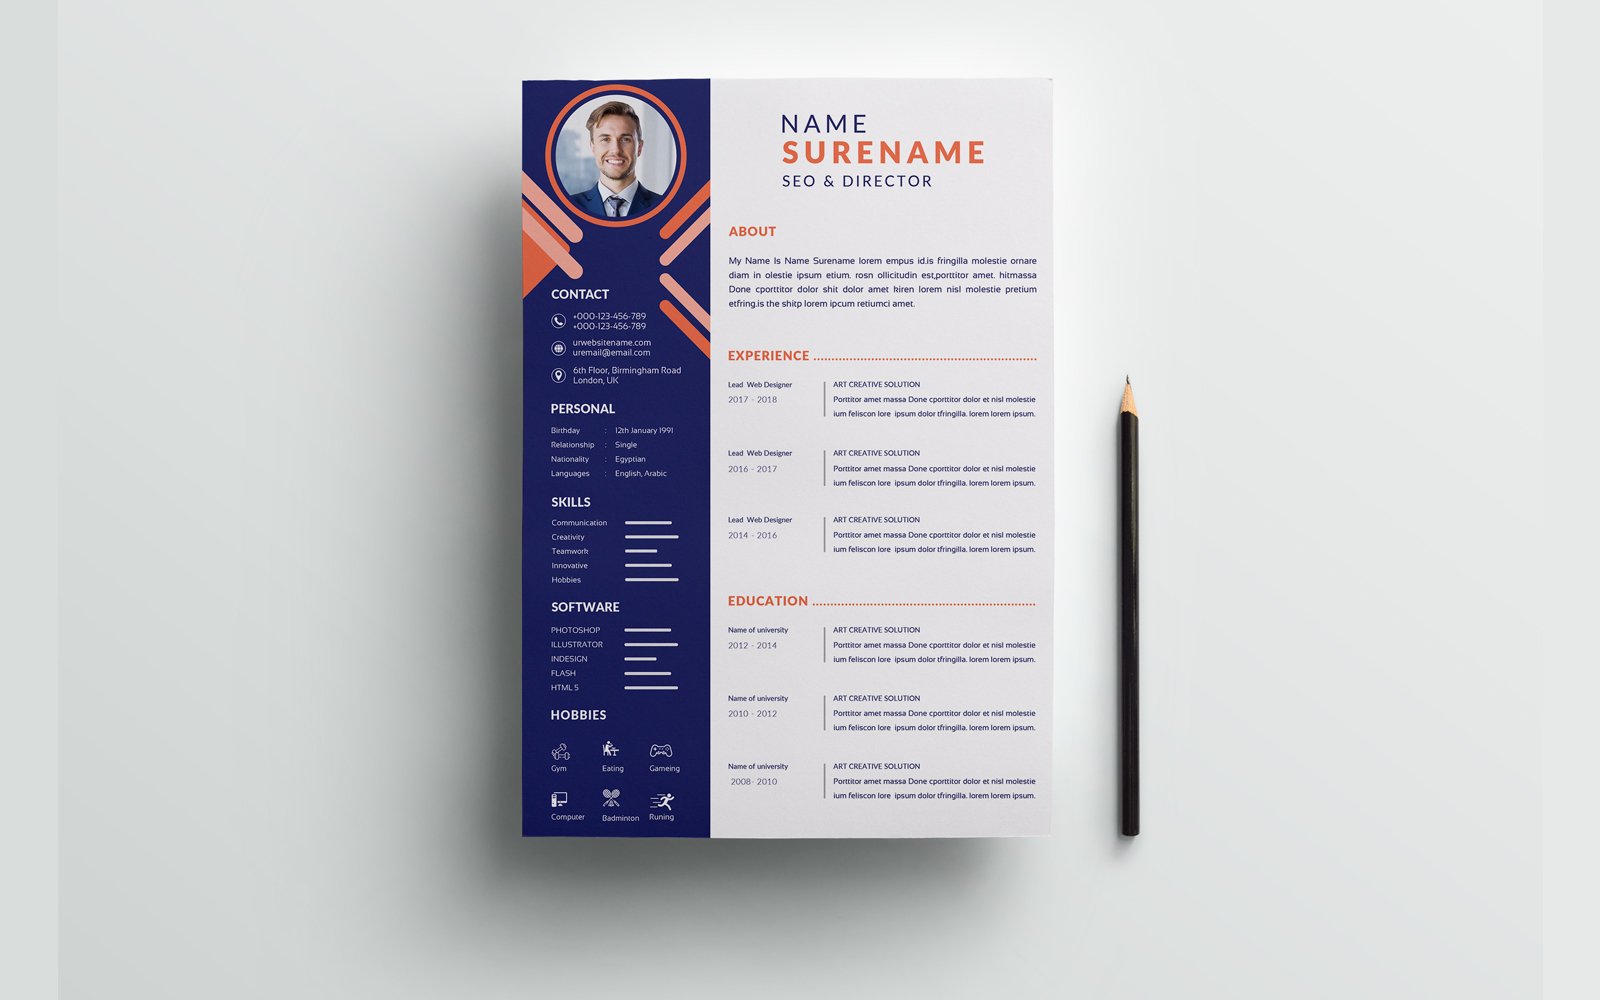 Template #381419 Resume Resume Webdesign Template - Logo template Preview